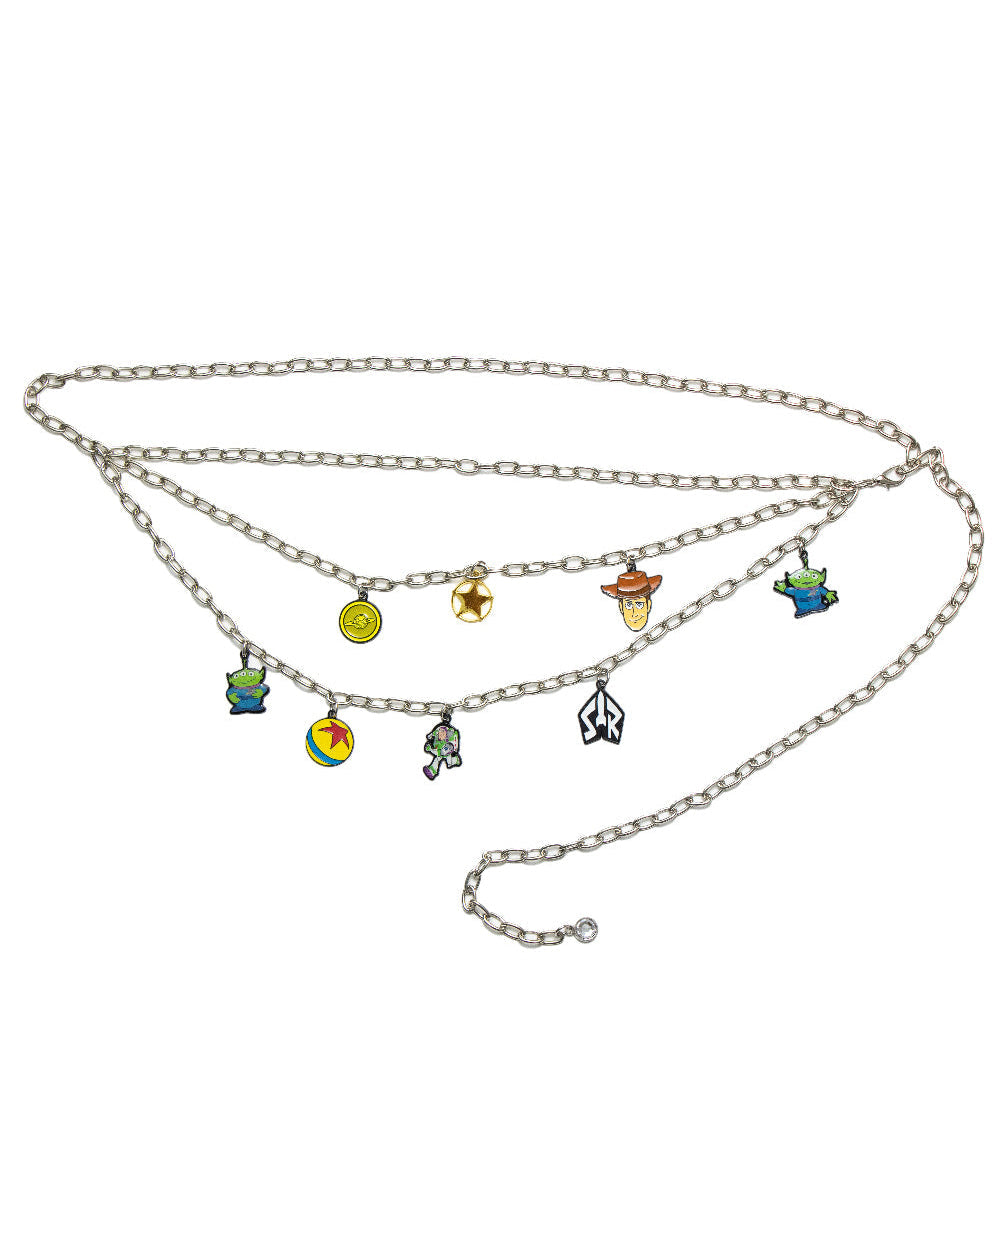 Disney Pixar Toy Story Chain Belt with Charms